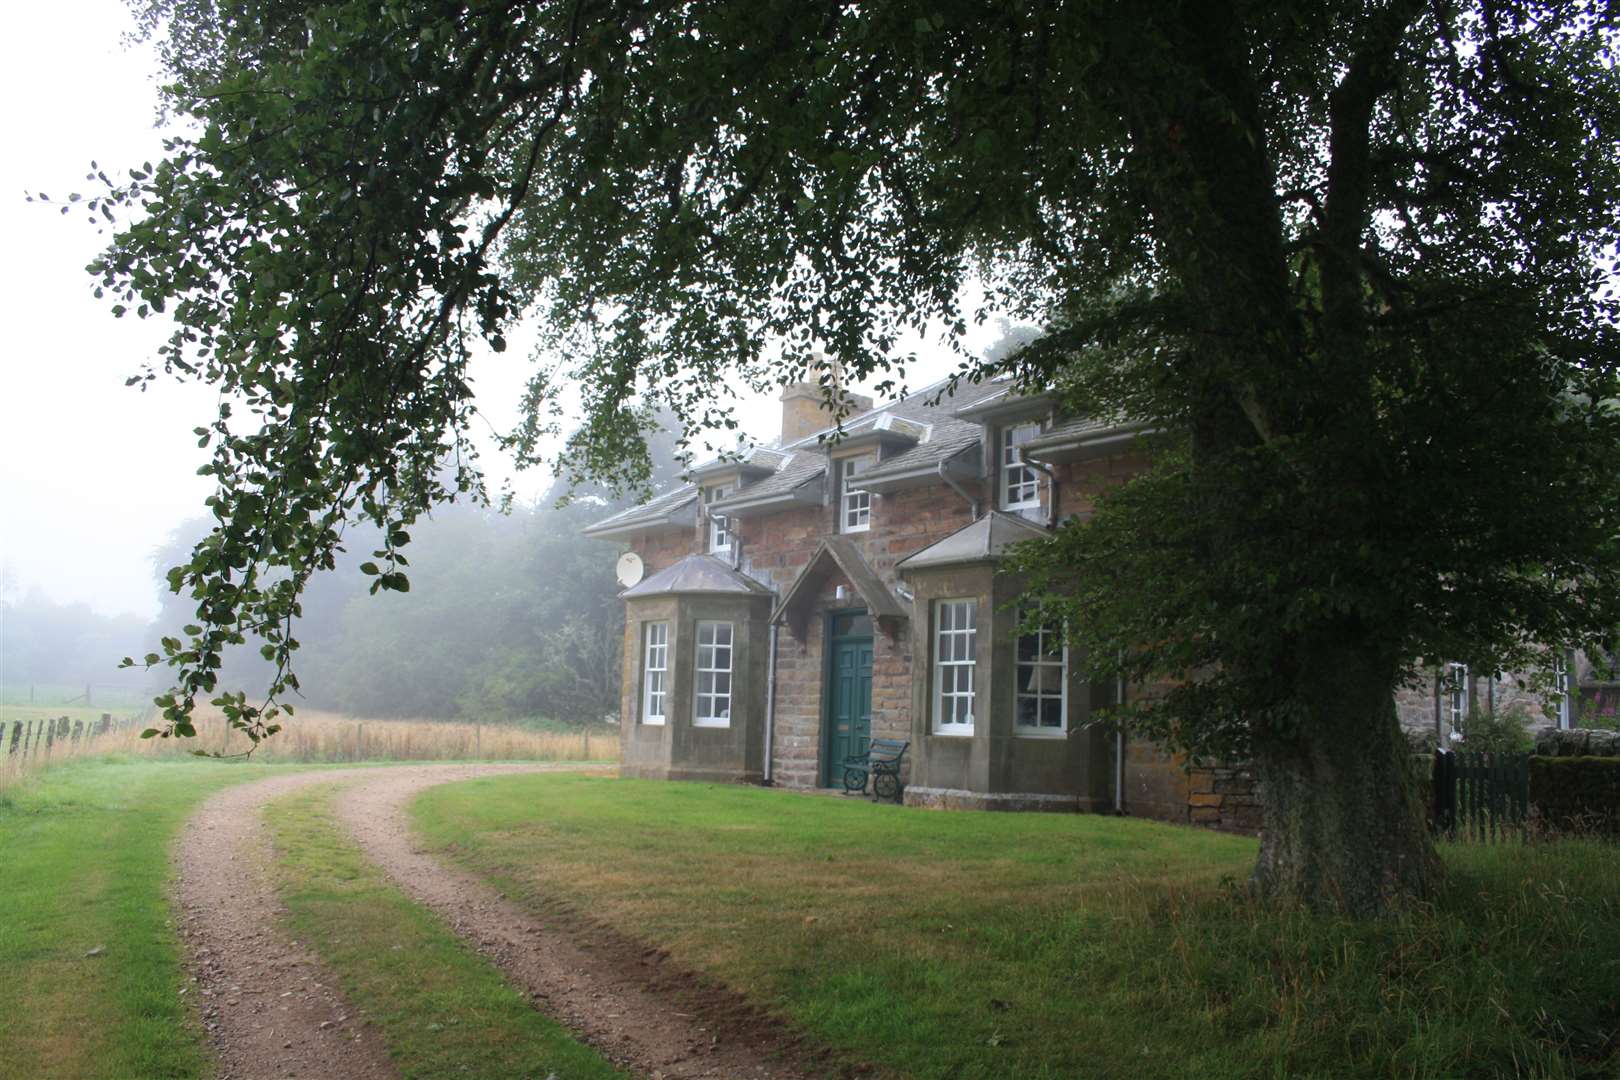 Braemore Lodge as it is today. Picture: Dan Mackay